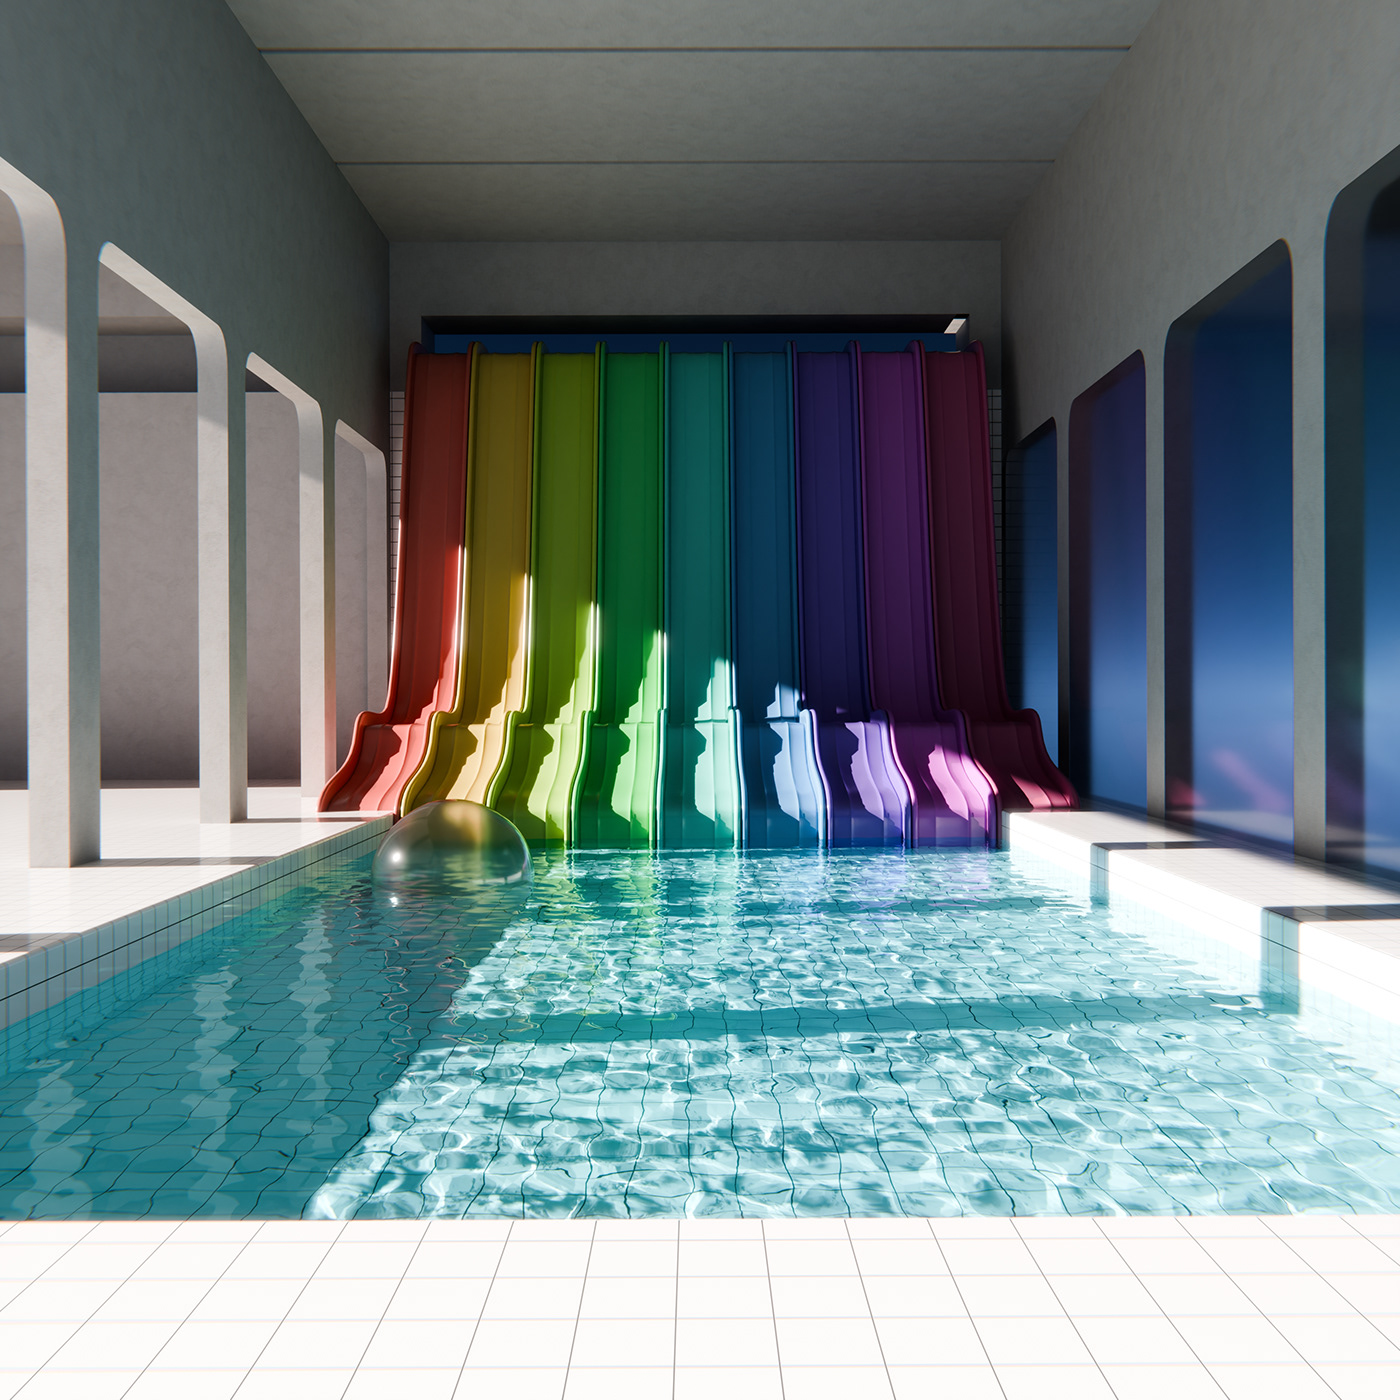 liminal swimming pool dreamcore liminal spaces dreampool poolside backrooms liminal space poolcore Poolrooms